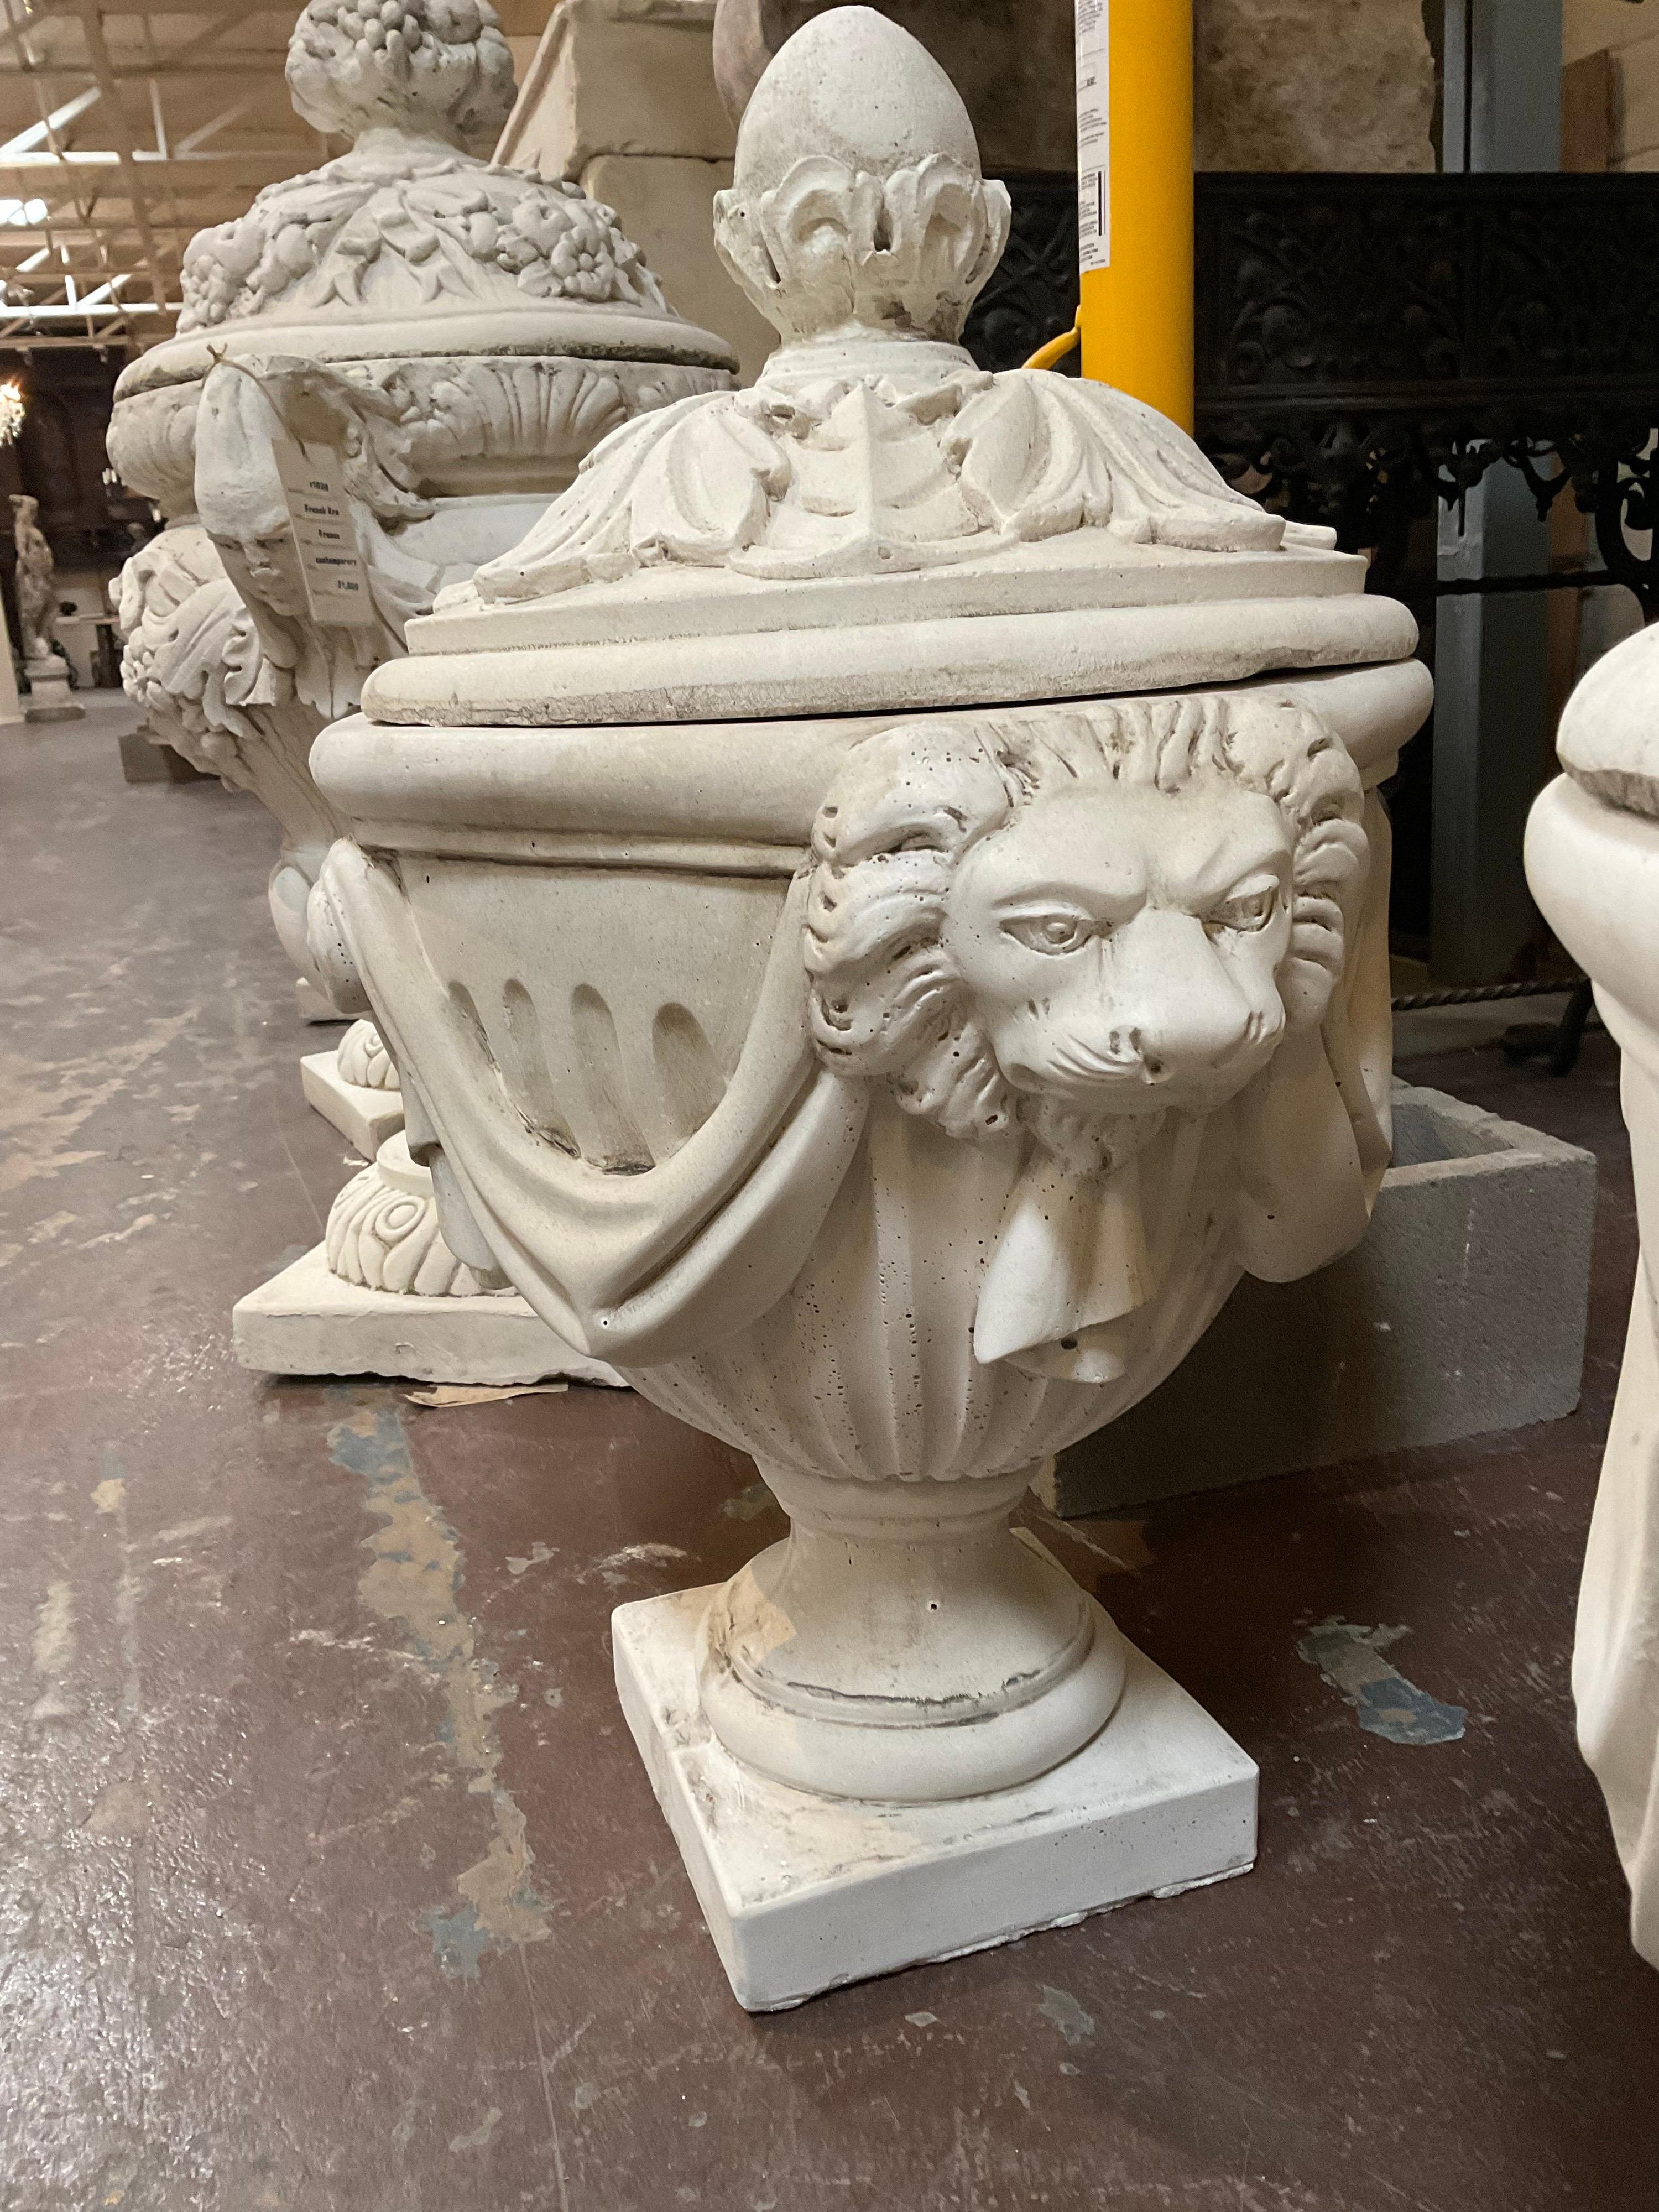 Impressive contemporary lion urn with lid included in purchase.